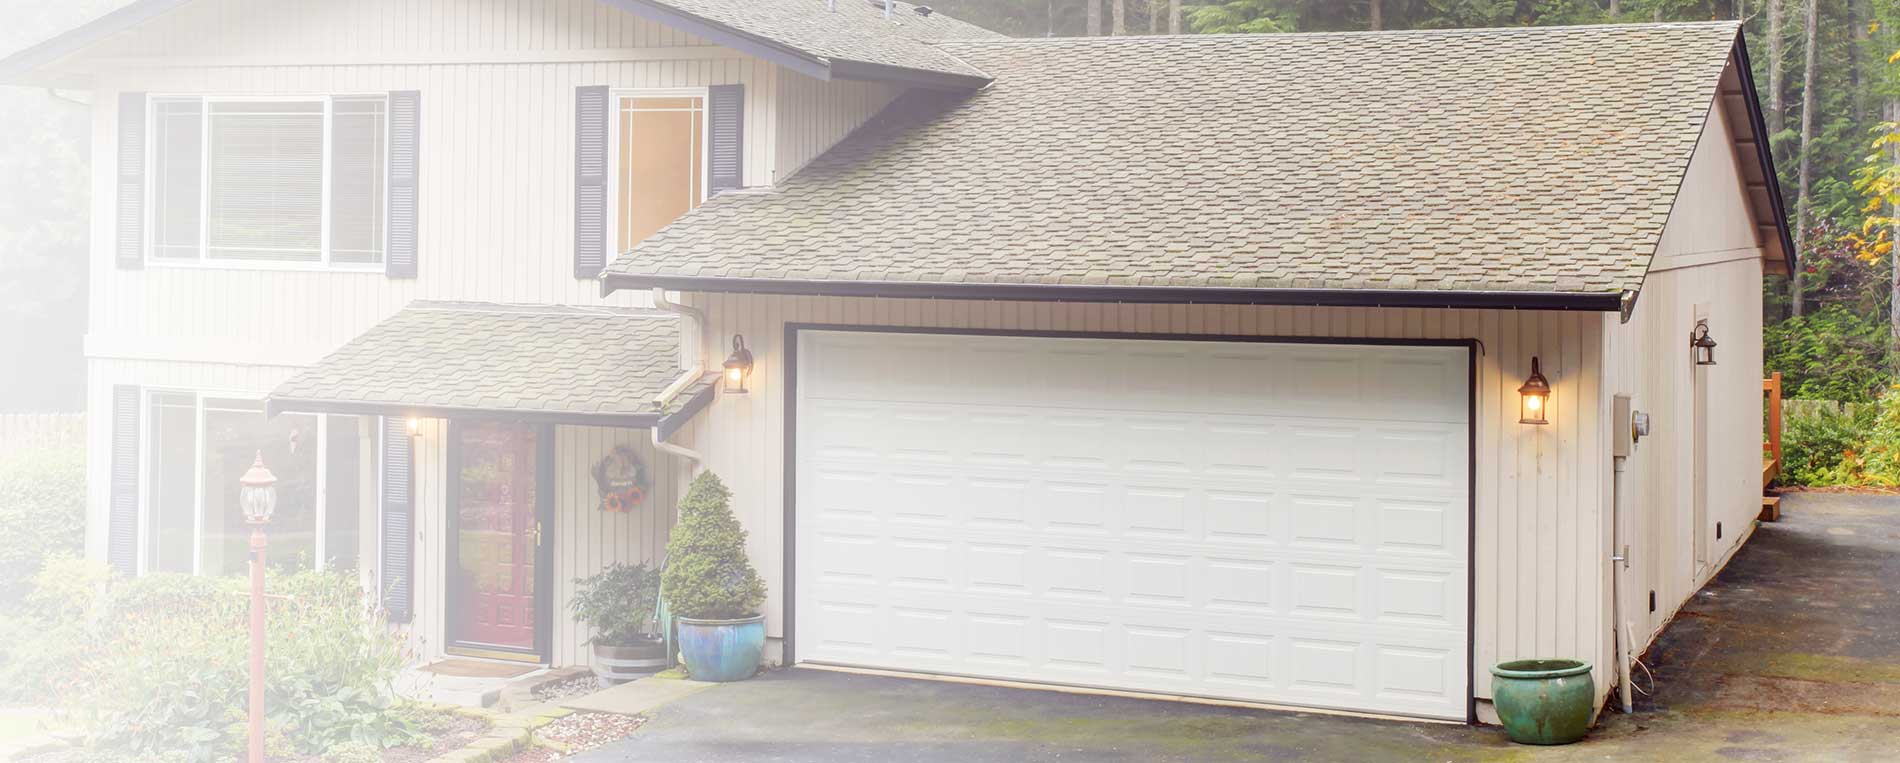 Suggestions About Garage Doors and Maintenance